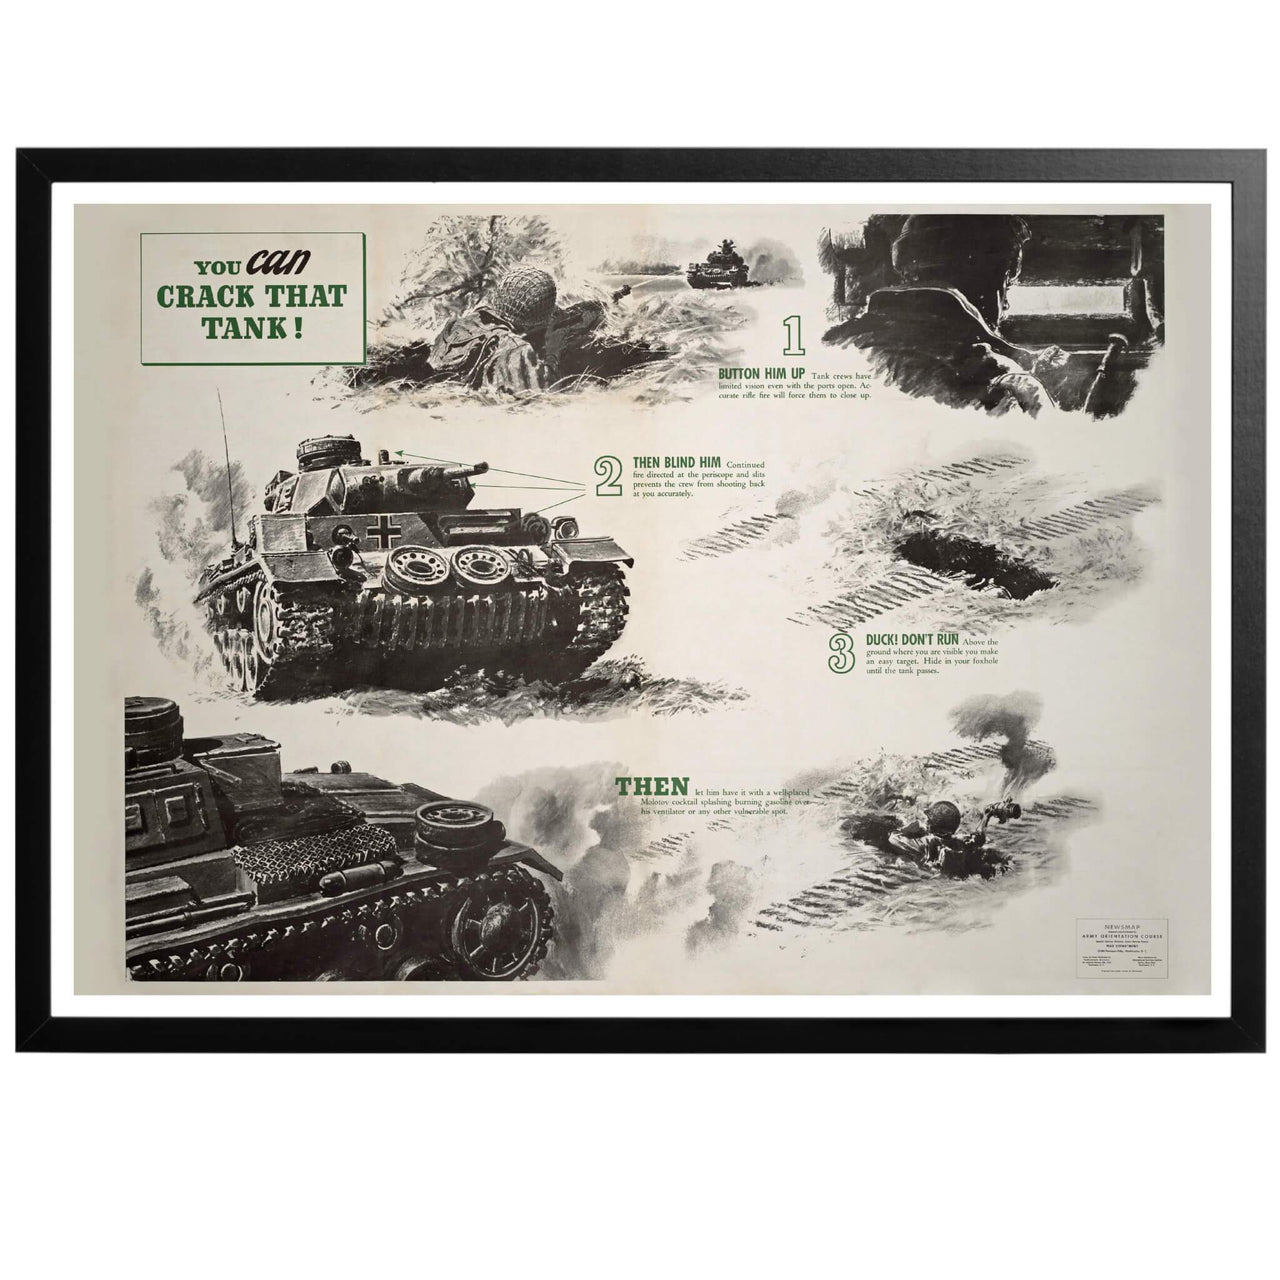 You CAN crack that tank! Poster